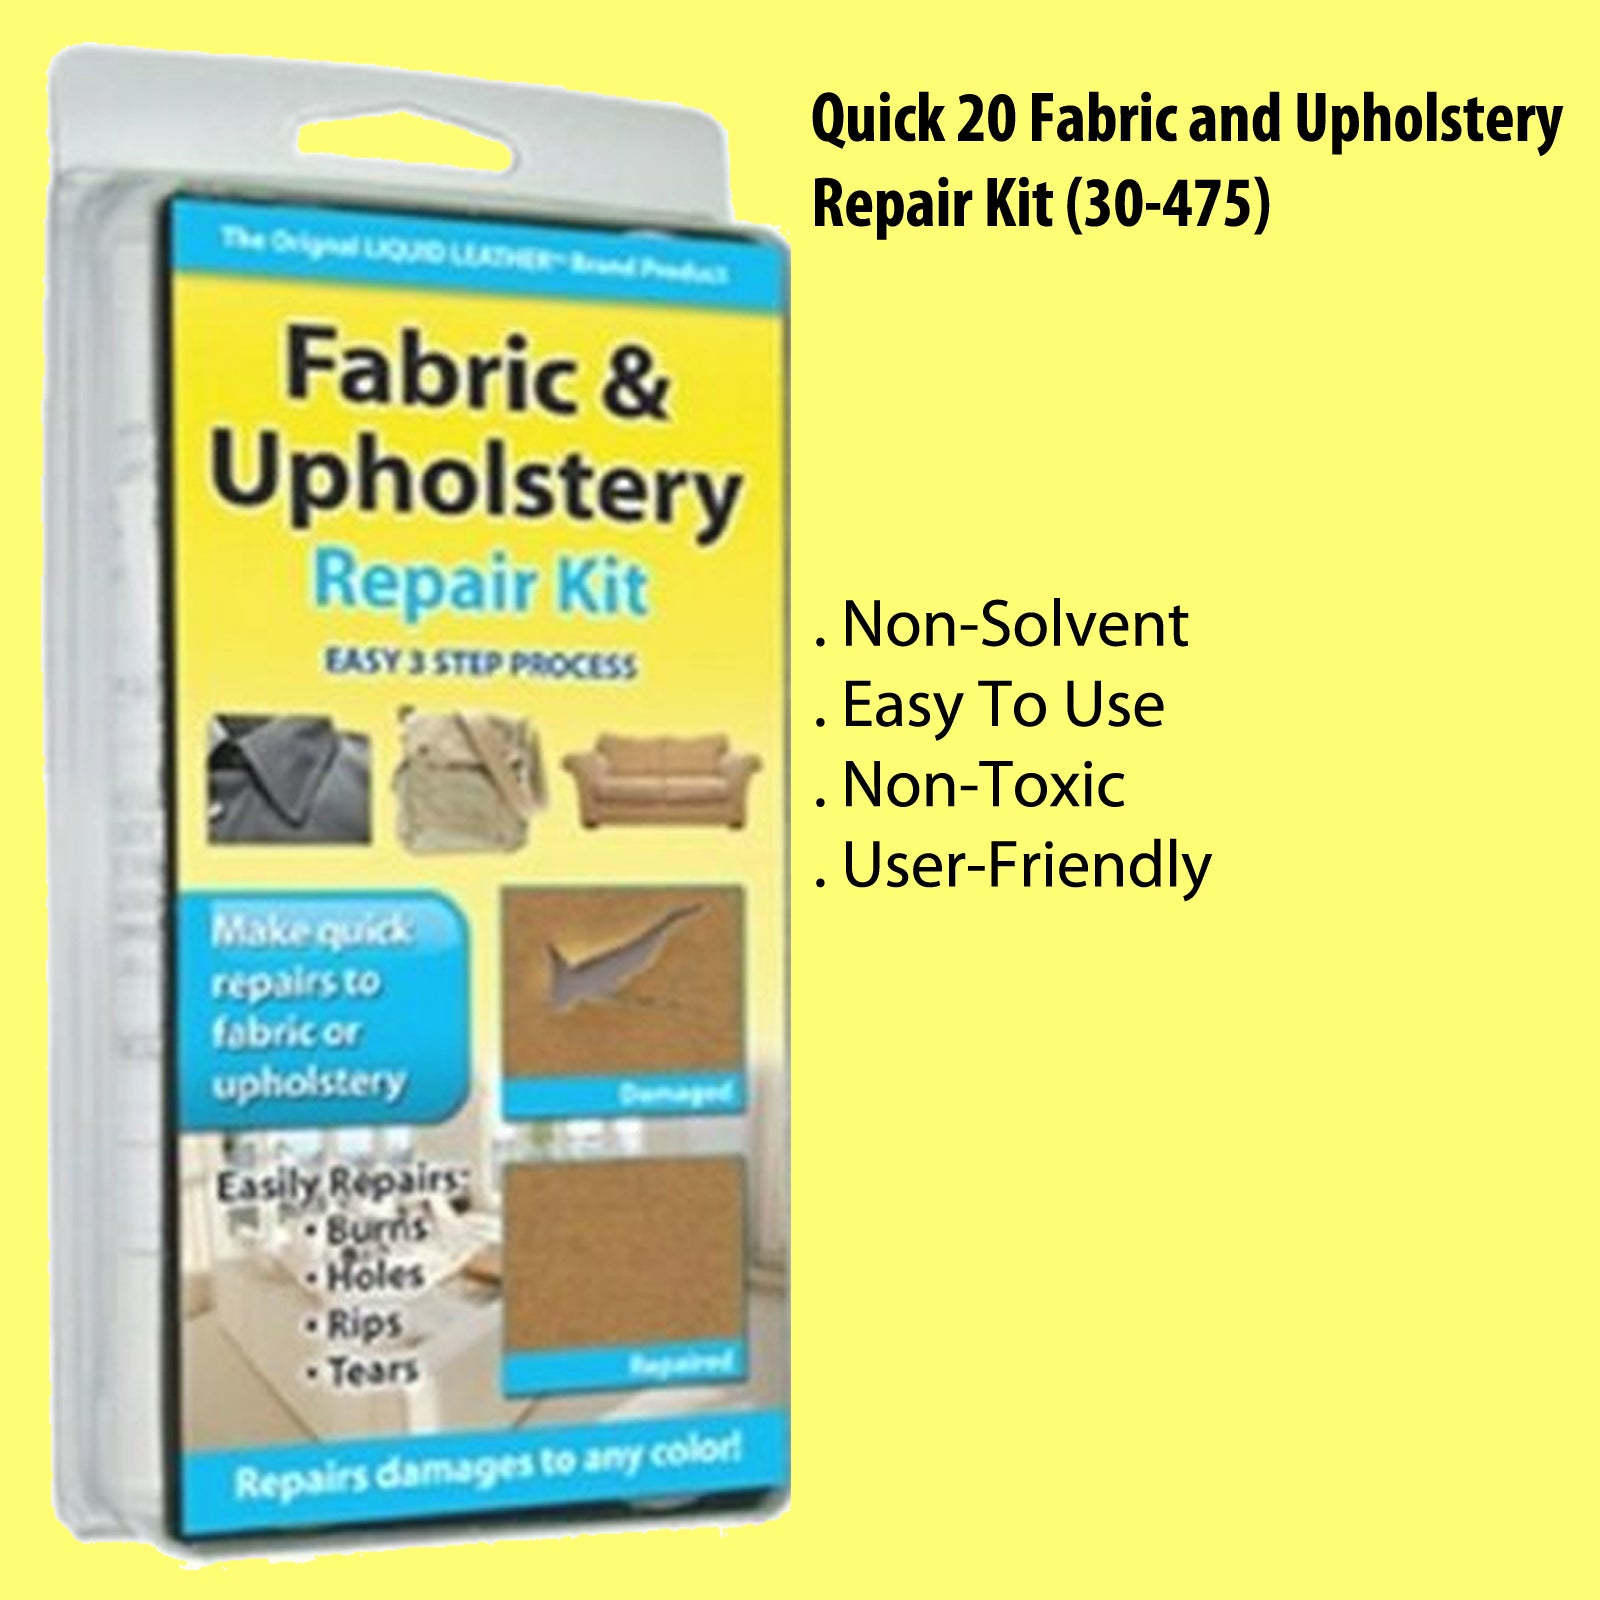 Quick 20 Fabric and Upholstery Repair Kit Colors & Adhesive